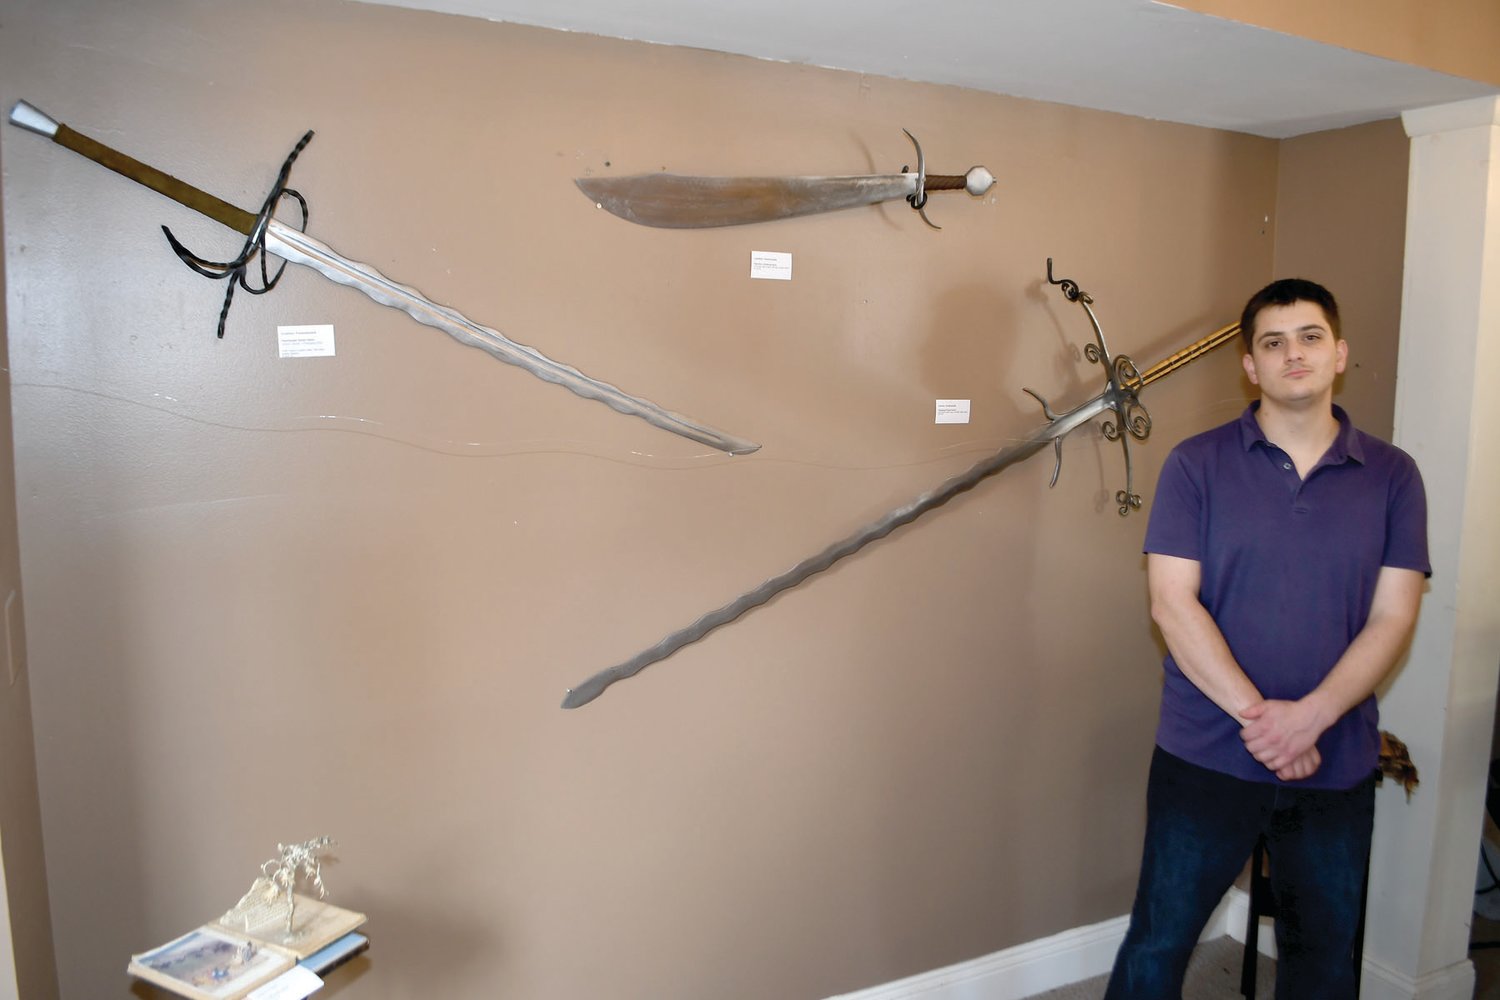 Jonathan Pantermarakis received a Jurors Choice designation for his outstanding craft (clockwise from left): Flamberge Swiss Saber;  Falchion, Hamberg Style; and Blamberge Parade Sword.